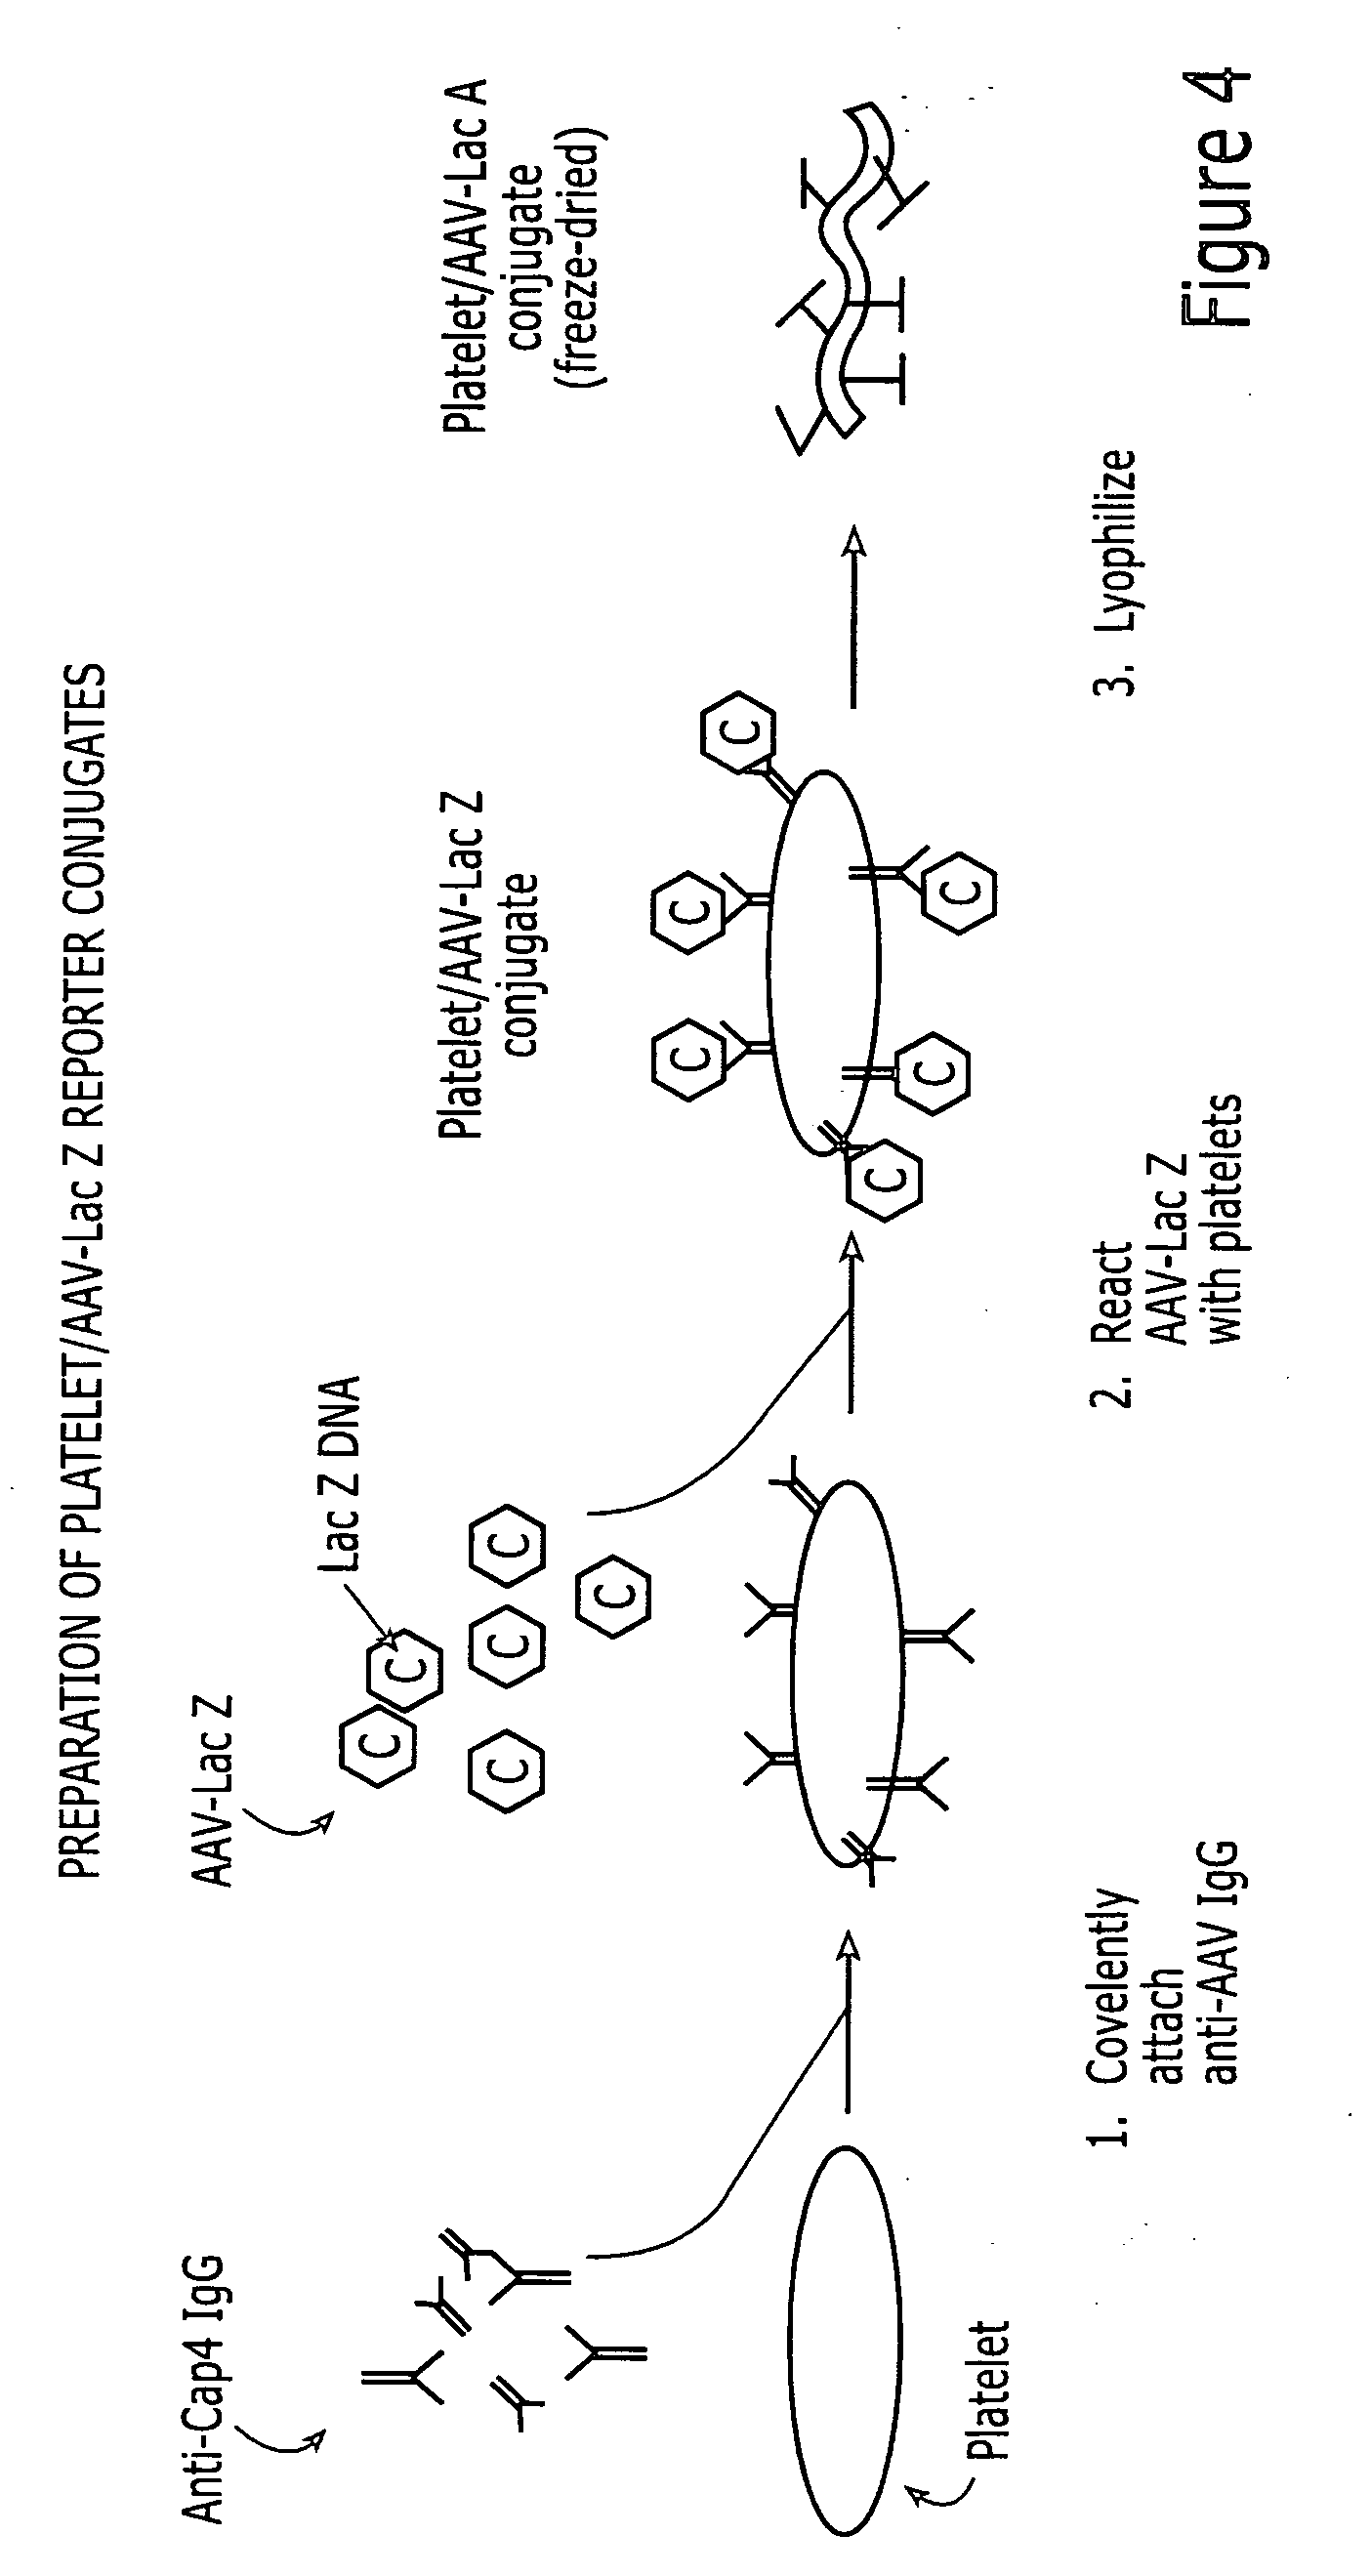 Delivery of compounds with rehydrated blood cells